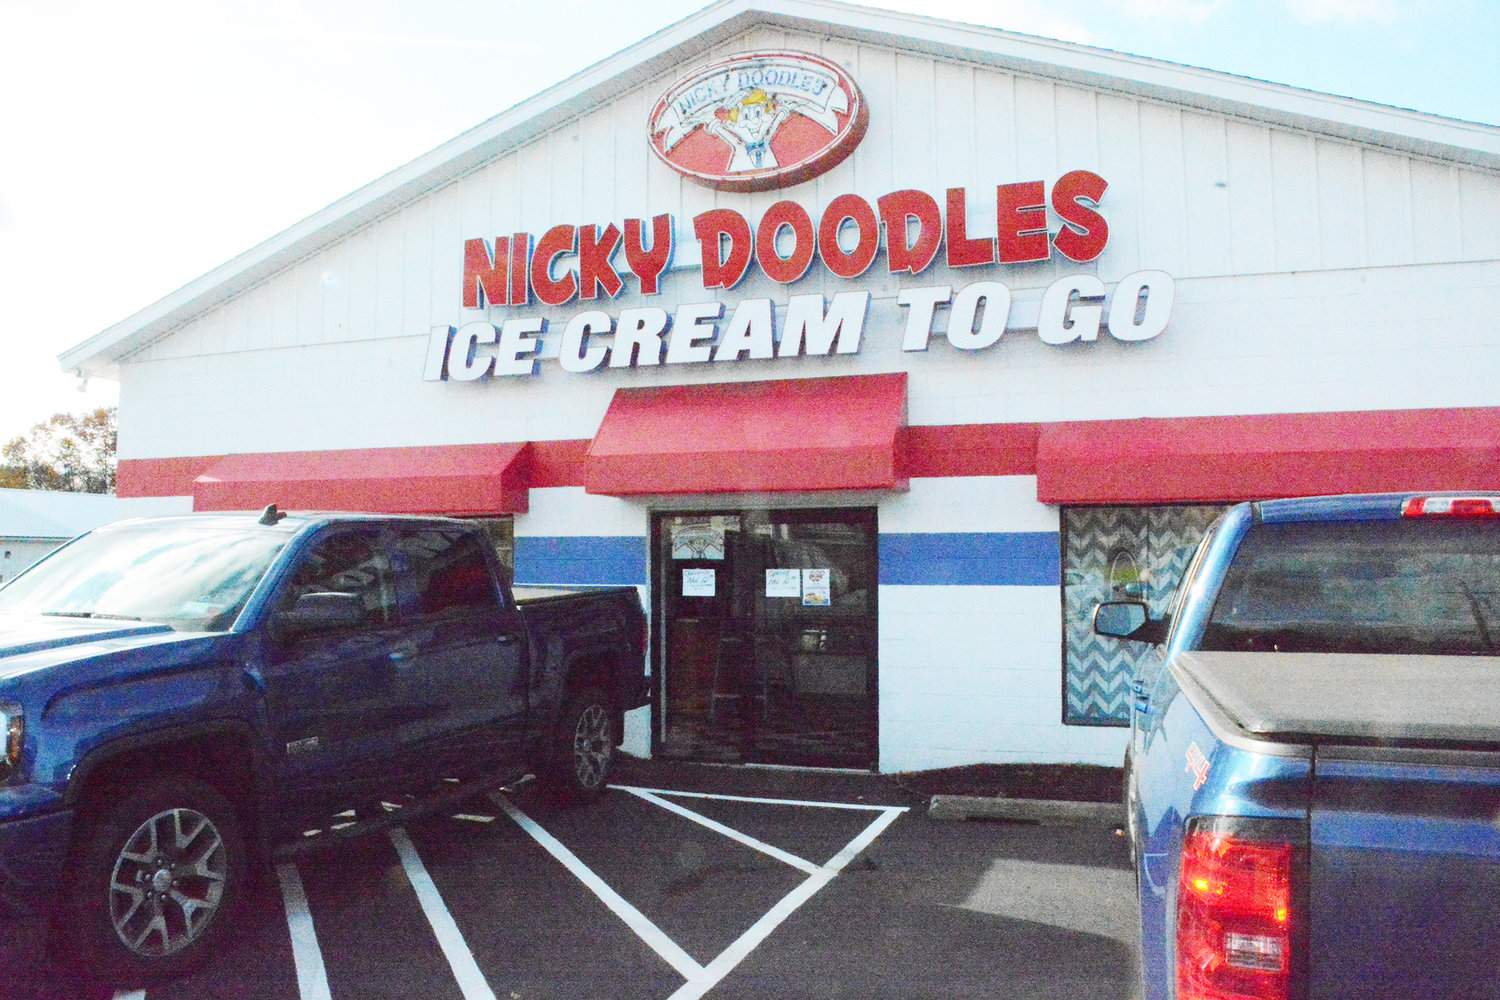 WINTER EATS — Nicky Doodles has been serving ice cream year round since 2017. But this year they’re bringing their food menu to the “TO GO” store conveniently located next to the eat-in restaurant at 1165 Erie Blvd. in Rome. Doors open Nov. 12 at 11 a.m. Owner Tim Twomey wants to remind folks this is a TO GO operation, no dining in. Also, since they make everything fresh, please order ahead by phone or online. You can come inside when picking up, but he suggests using the new drive-up window on the right hand side of the building.